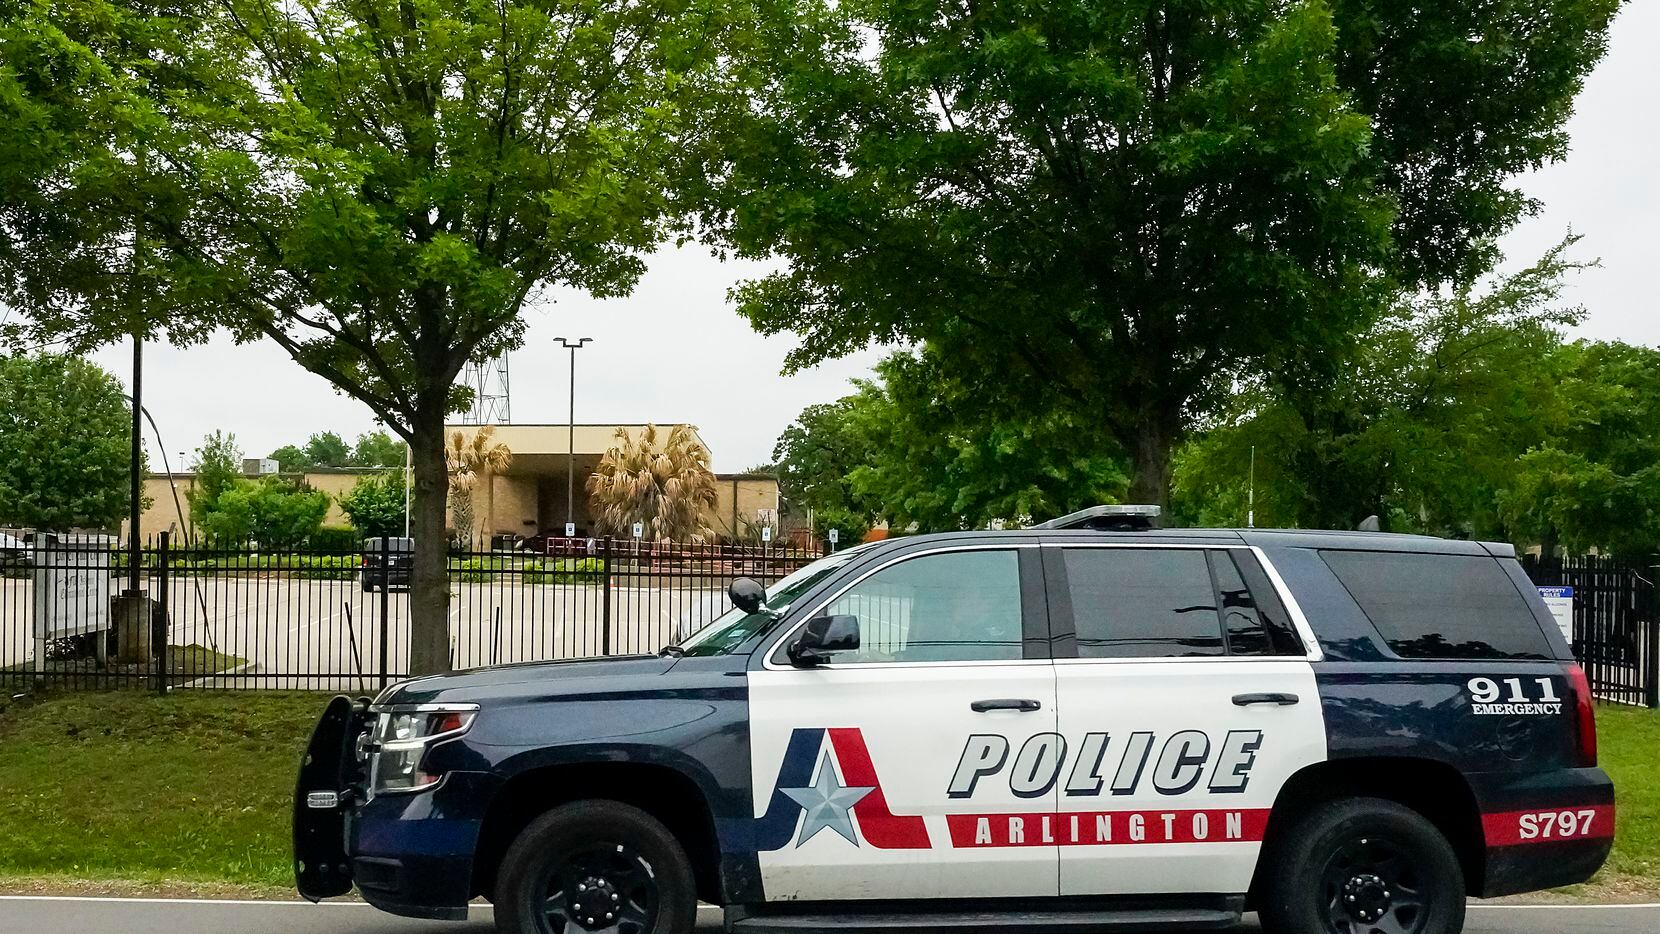 BREAKING NEWS: 4 Arlington, Texas, Schools Were Placed on Lockdown in the First Week of School — Daniel Whyte III Says Again, Parents, Pull Your Children Out of These Hell-hole Public Schools, For Your Children’s Good and For Your Own Good, Lest You Have a Heart Attack Worrying About Your Children